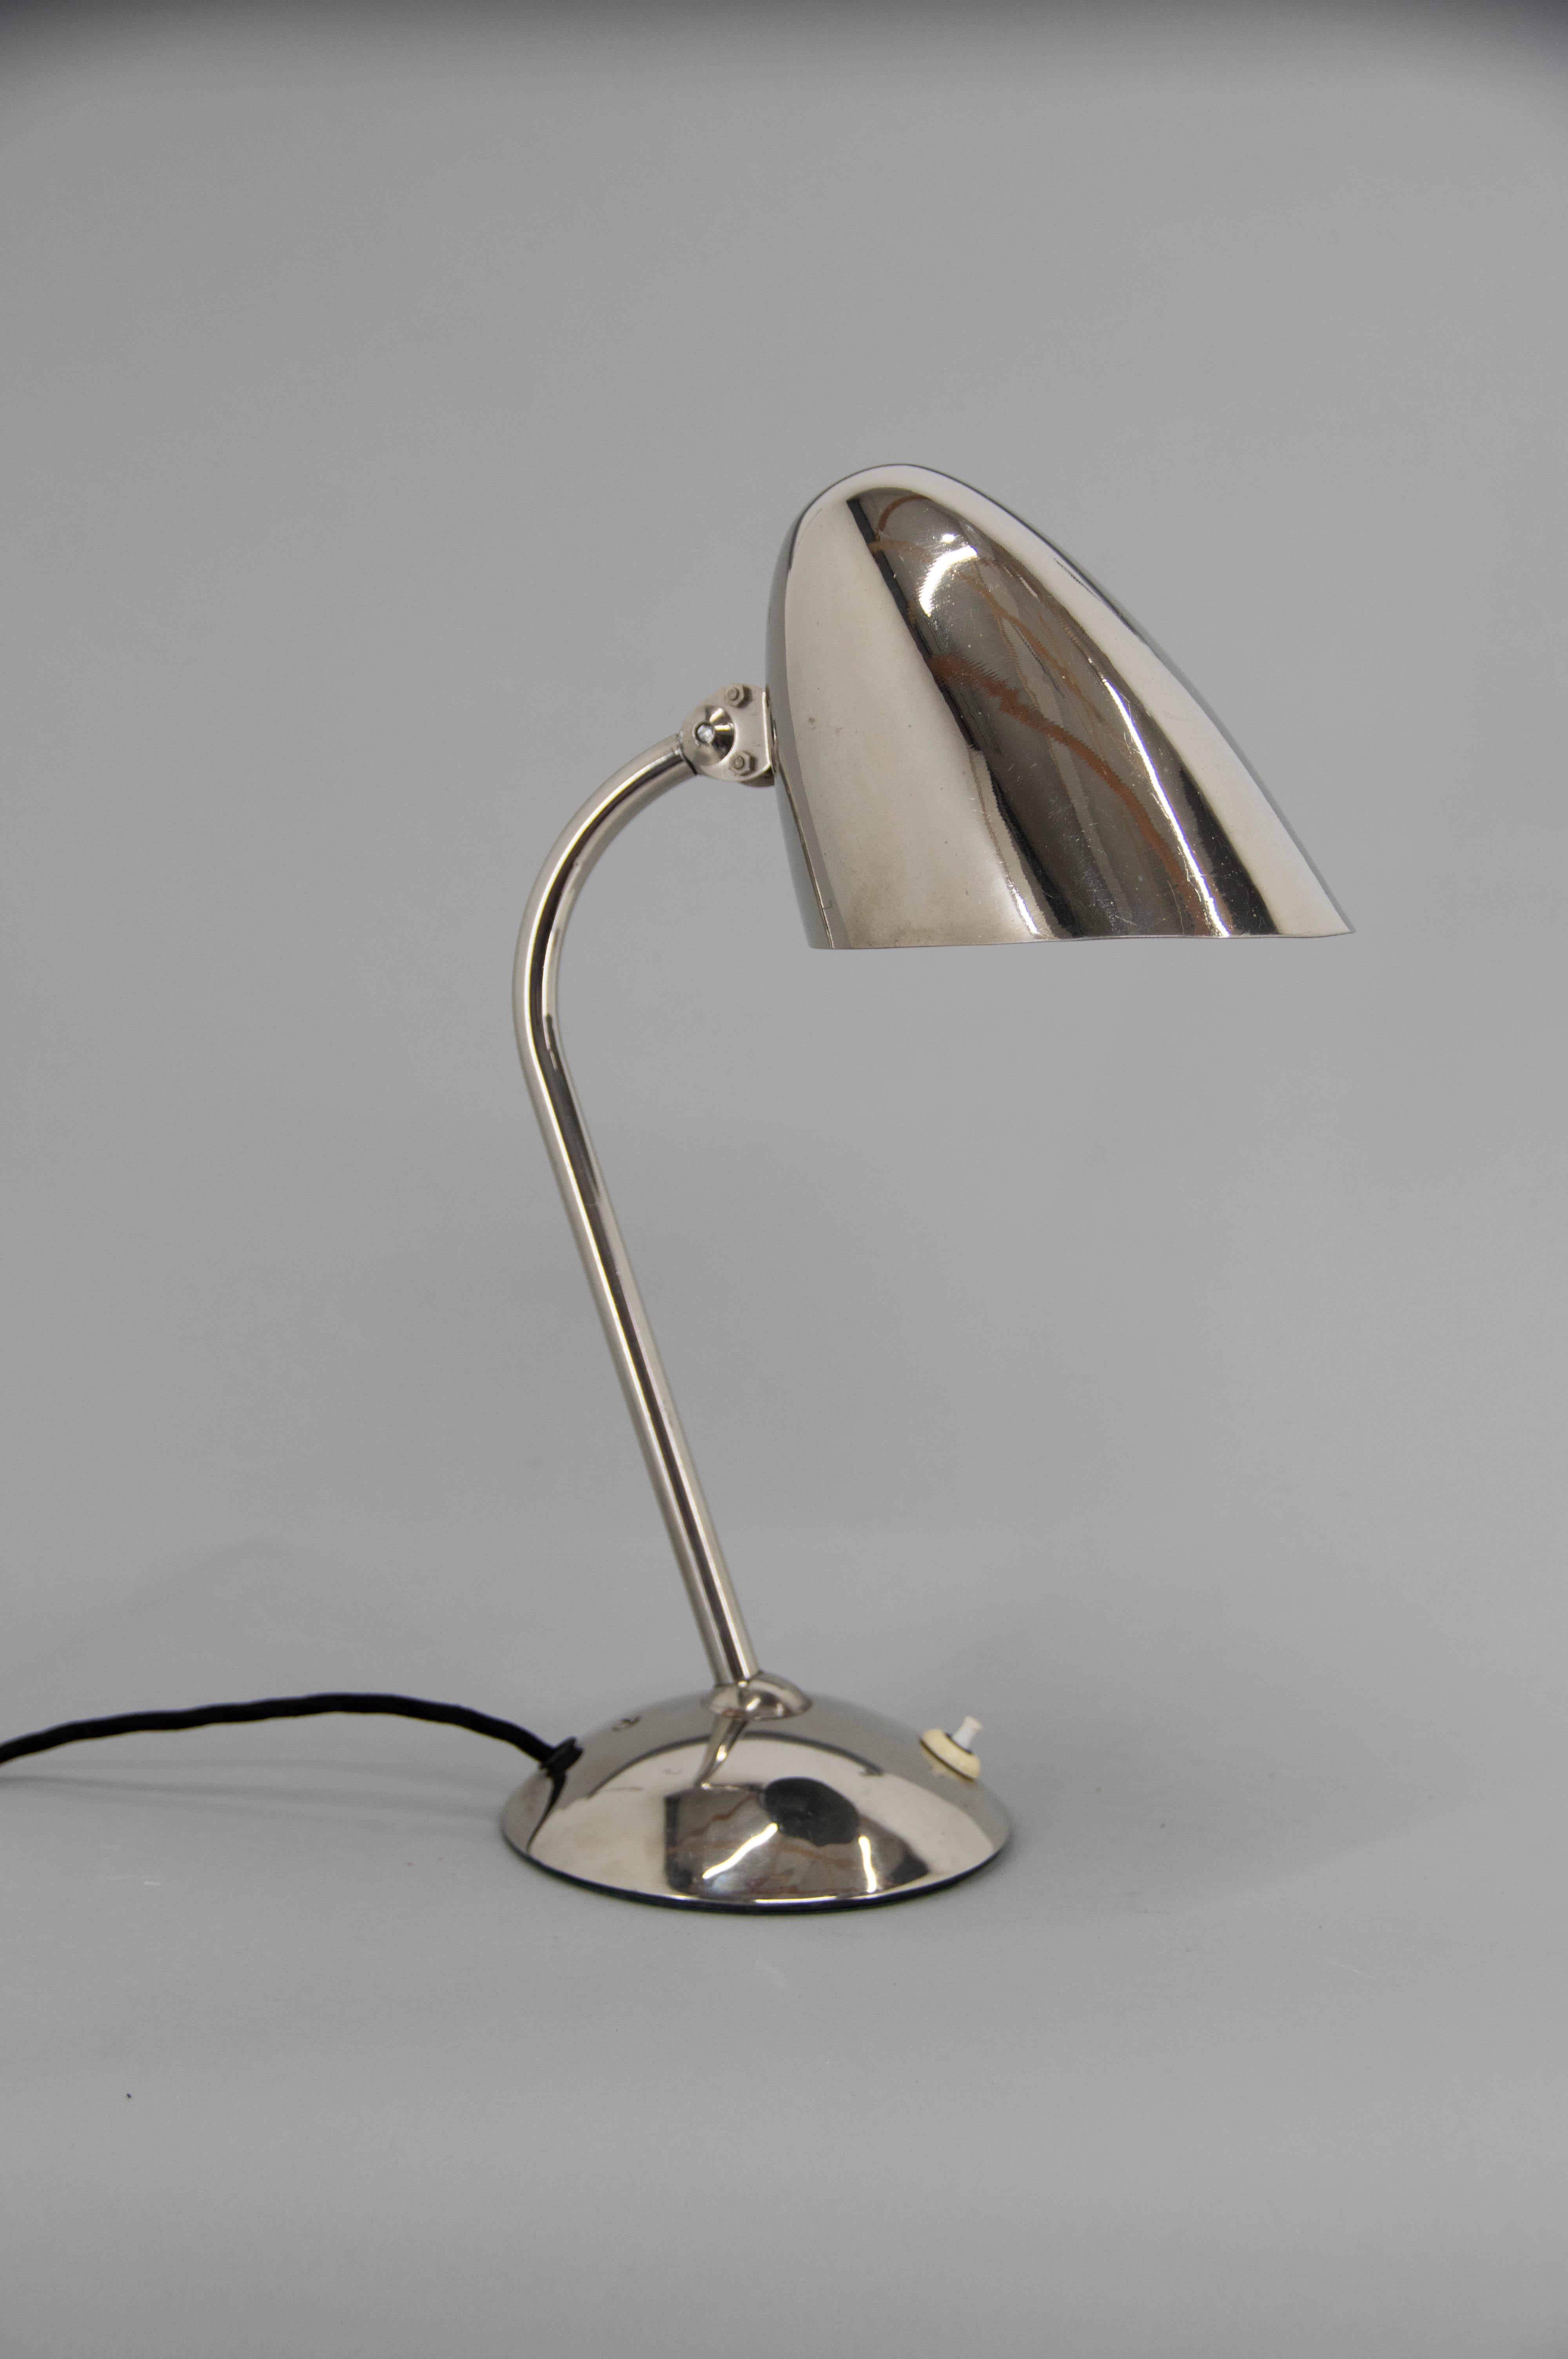 Iconic table lamp by Franta Anyz. Very well preserved nickel-plated version.
This lamp is famous for its patented Anyz joints that make the shade as flexible as possible.
1x40W, E25-E27 bulb
US plug adapter included.